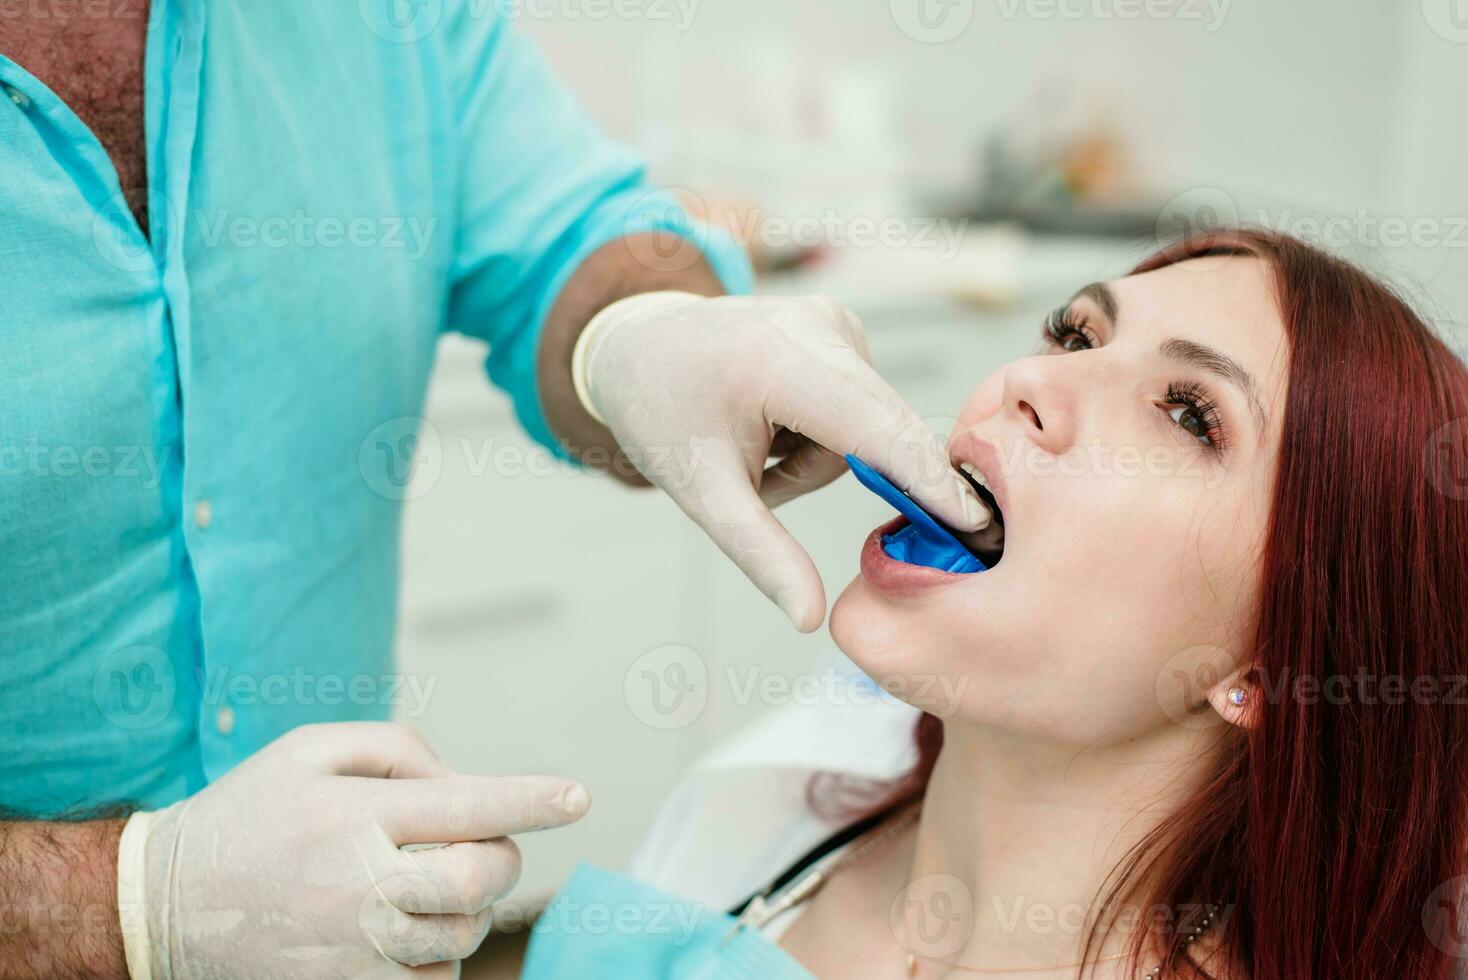 The orthodontist shows the patient an impression tray in which the silicone impression material will be placed to get the shape of her teeth photo